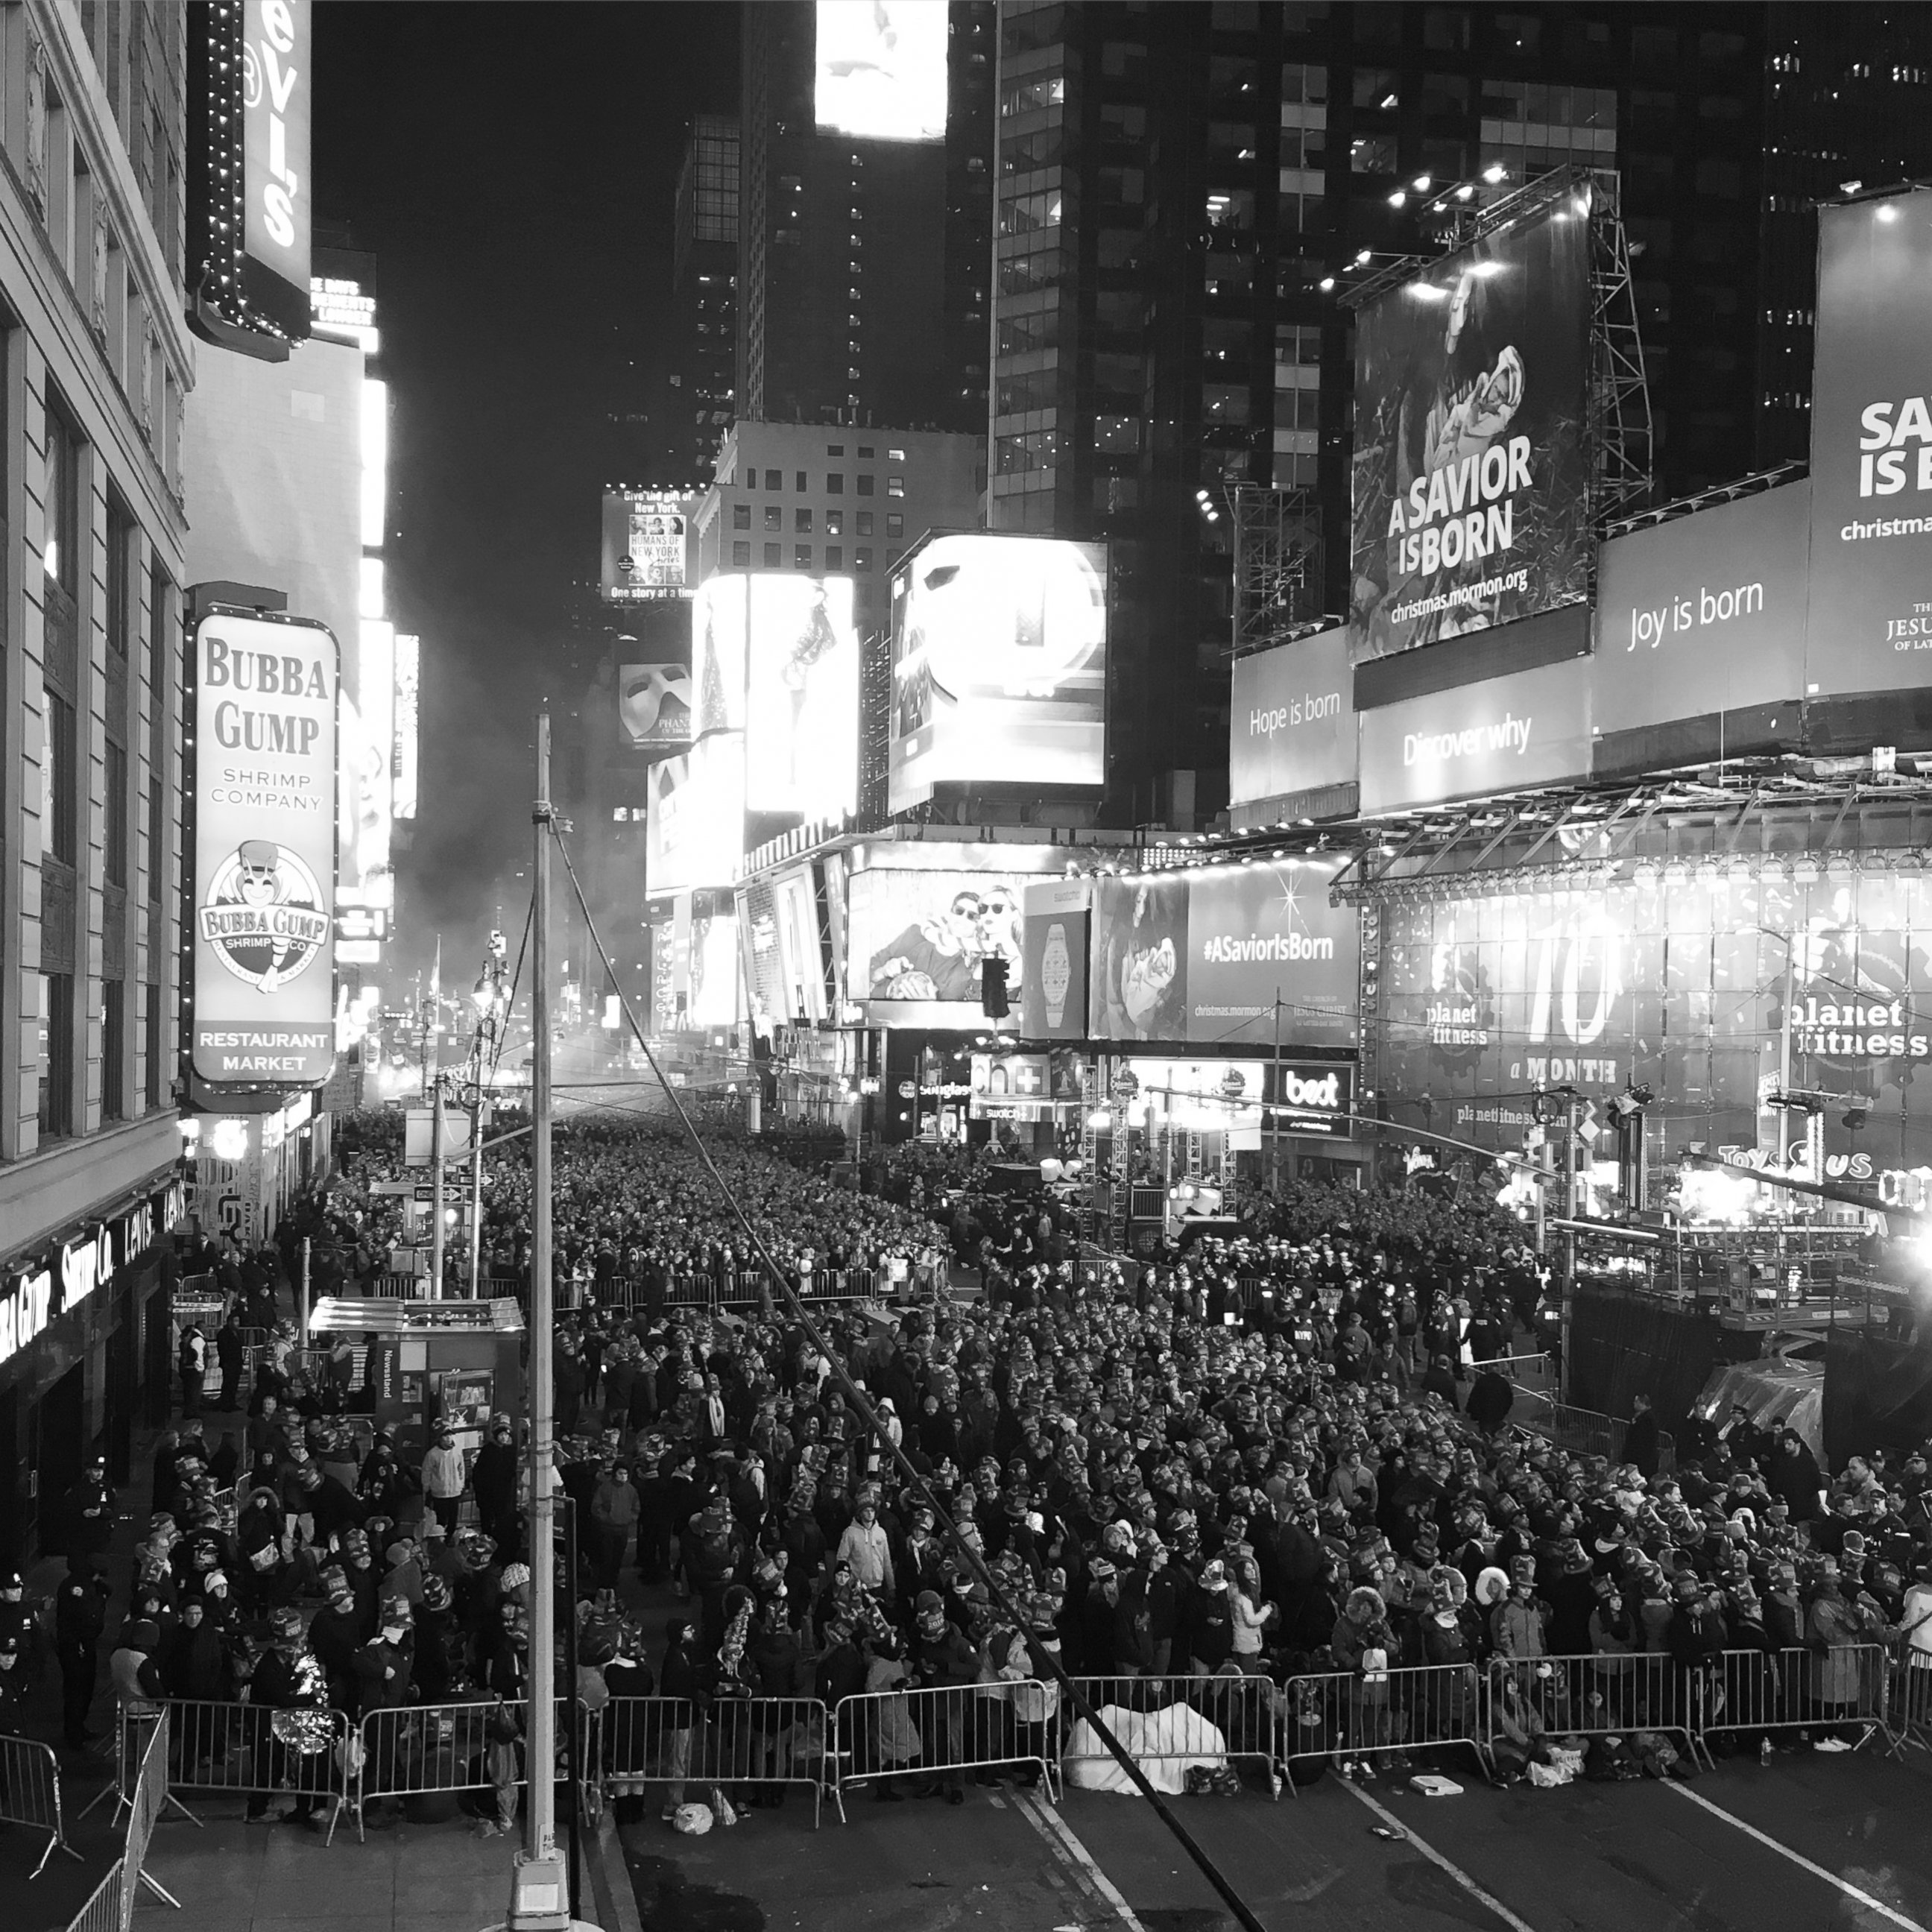 PHOTO: An estimated 1 million people attended the New Year's Eve celebrations in New York's Times Square.